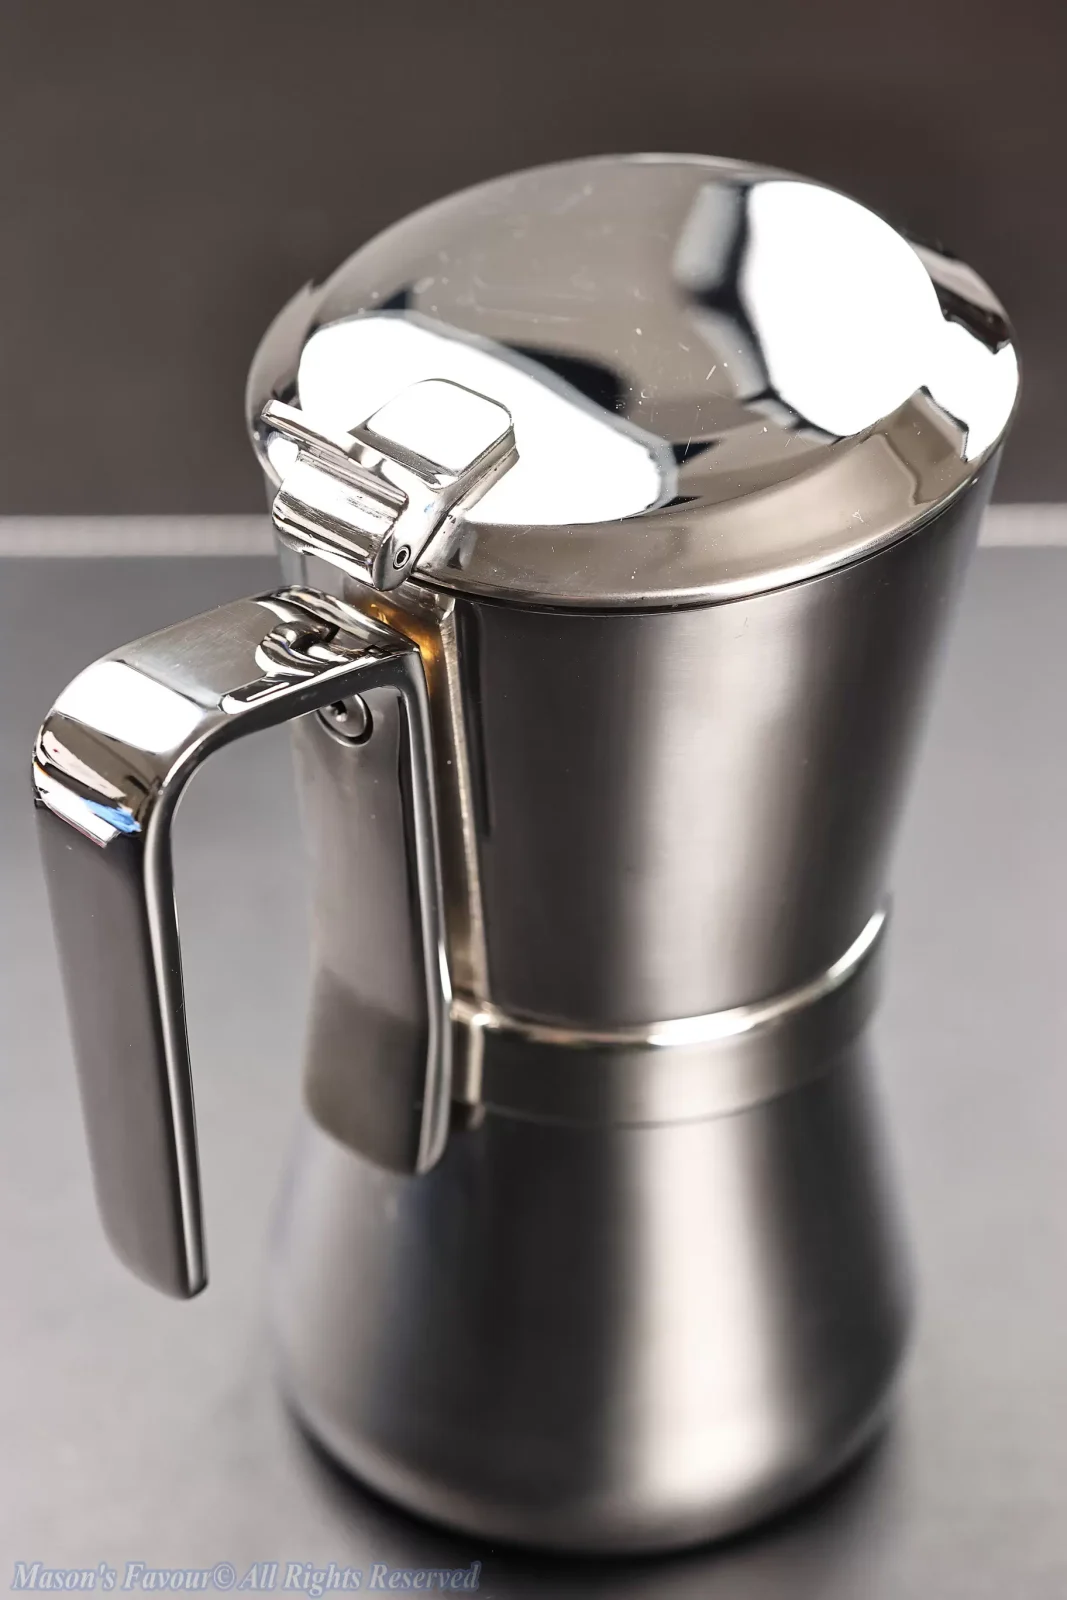 Giannini Restyling Moka Pot 6 Cups - Perspective 4